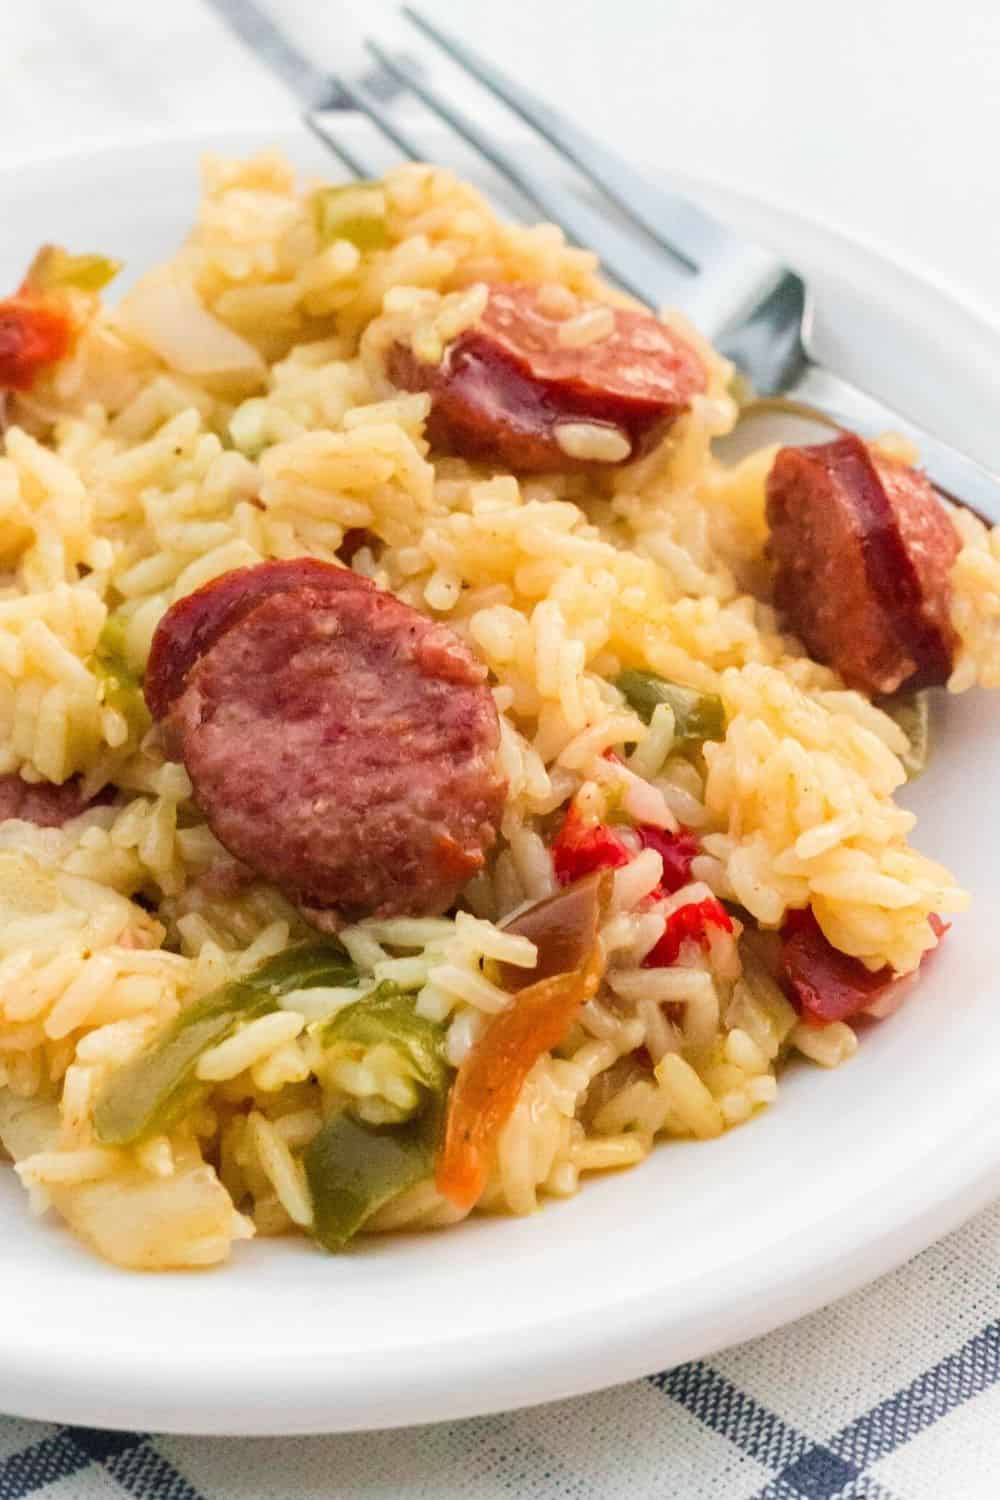 Pressure Cooker sausage and rice served on a white plate